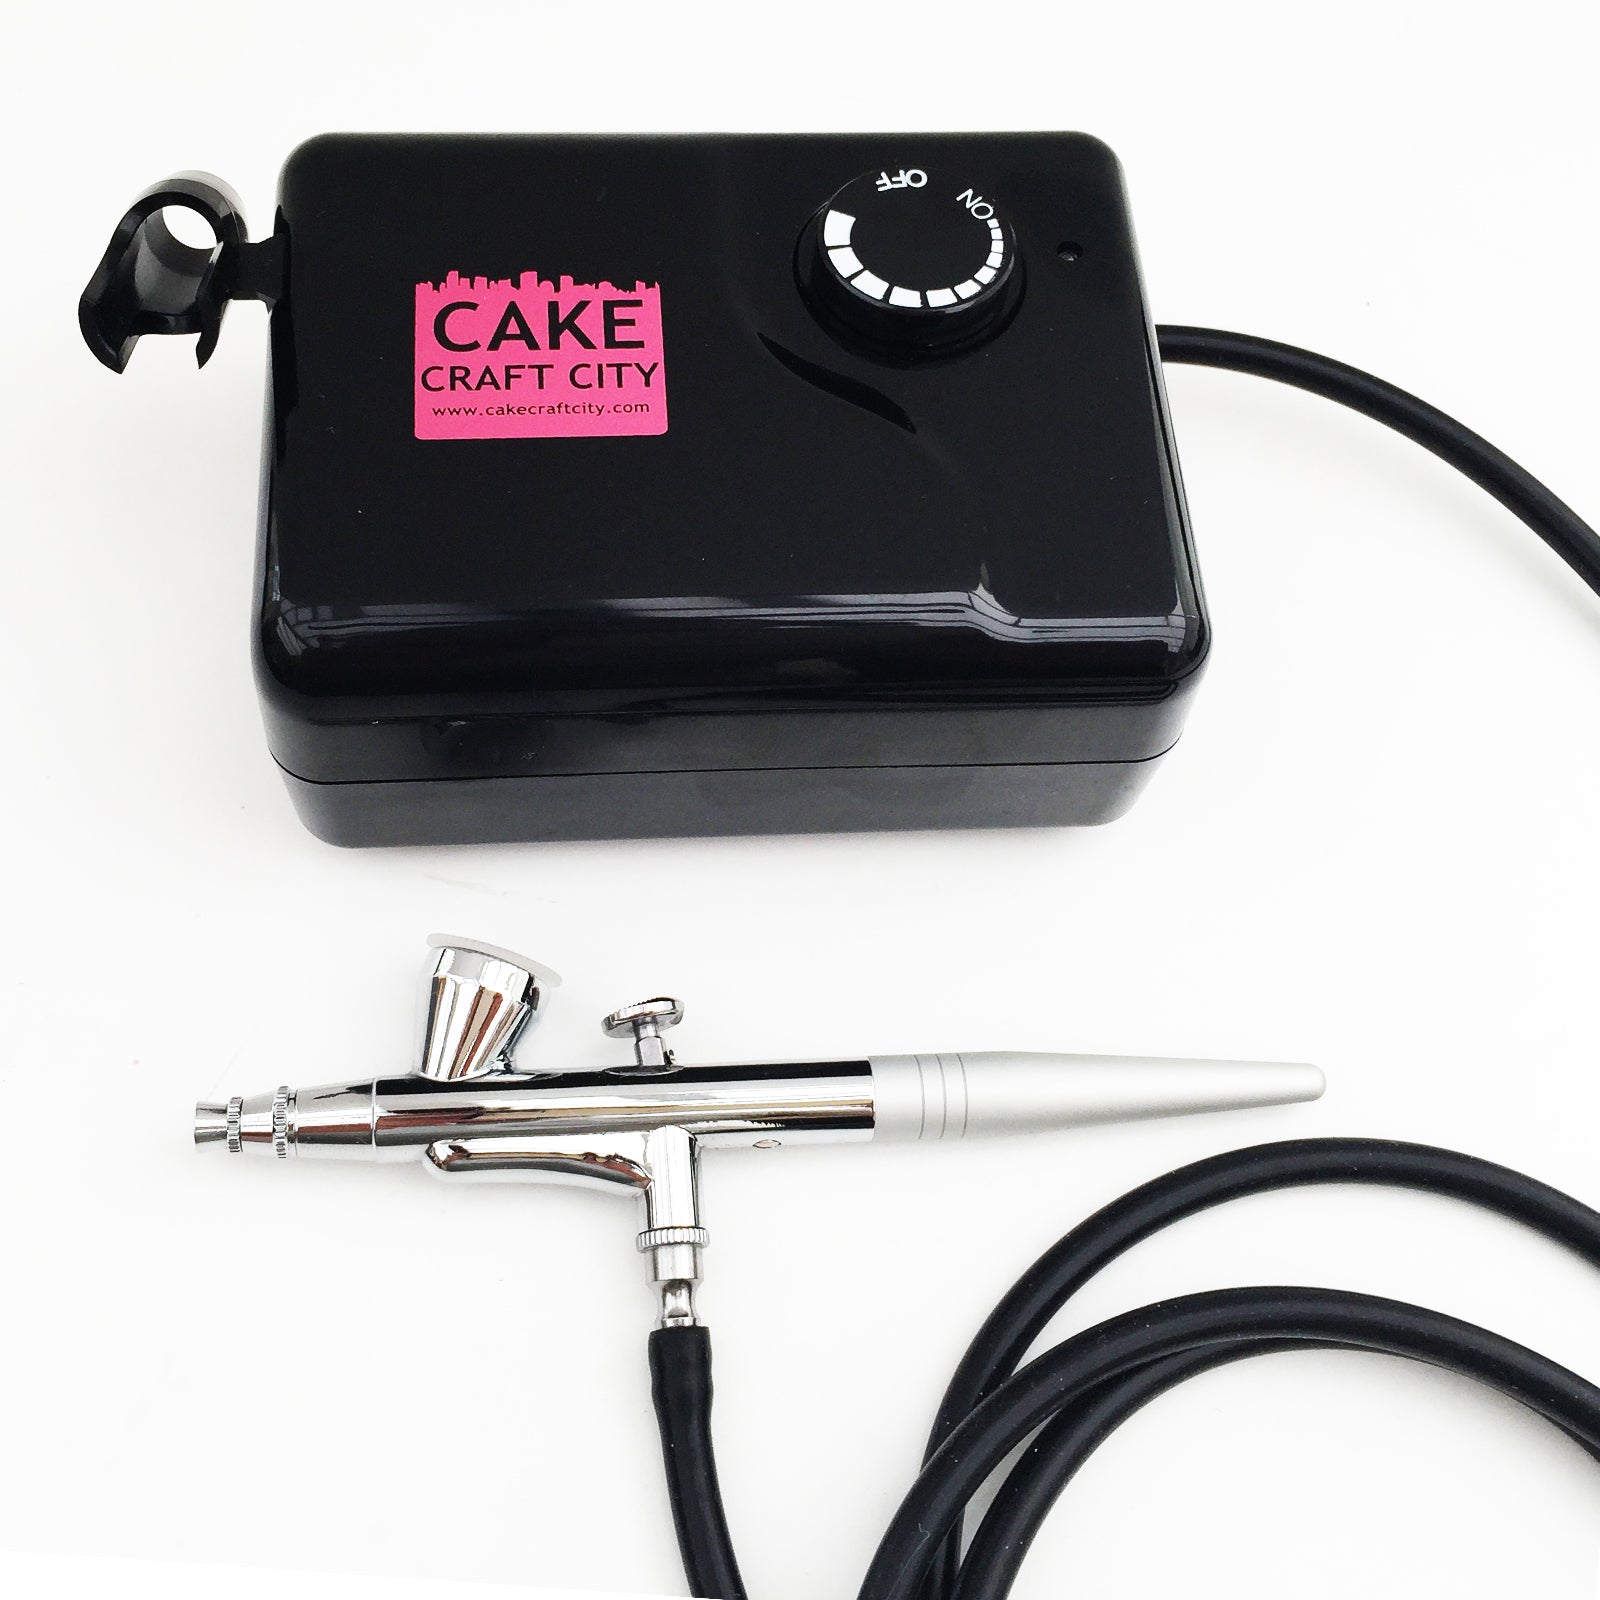 Cake Decorating Airbrush Starter Kit - Includes - Compressor - Gun - 3 Colours - Carry case for Cake Decorating